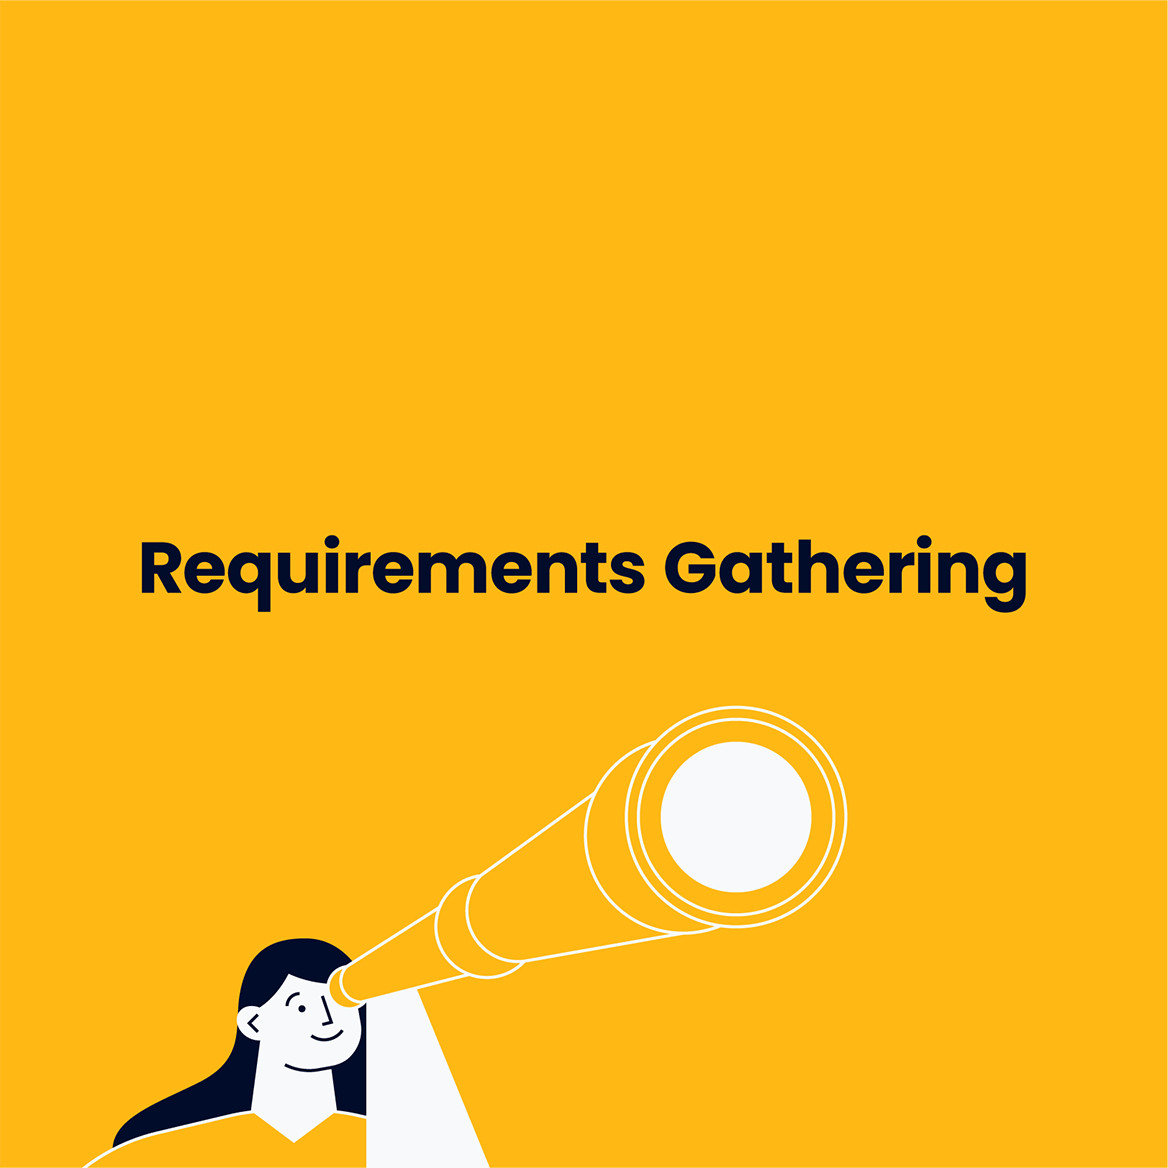 Templates-Requirements Gathering